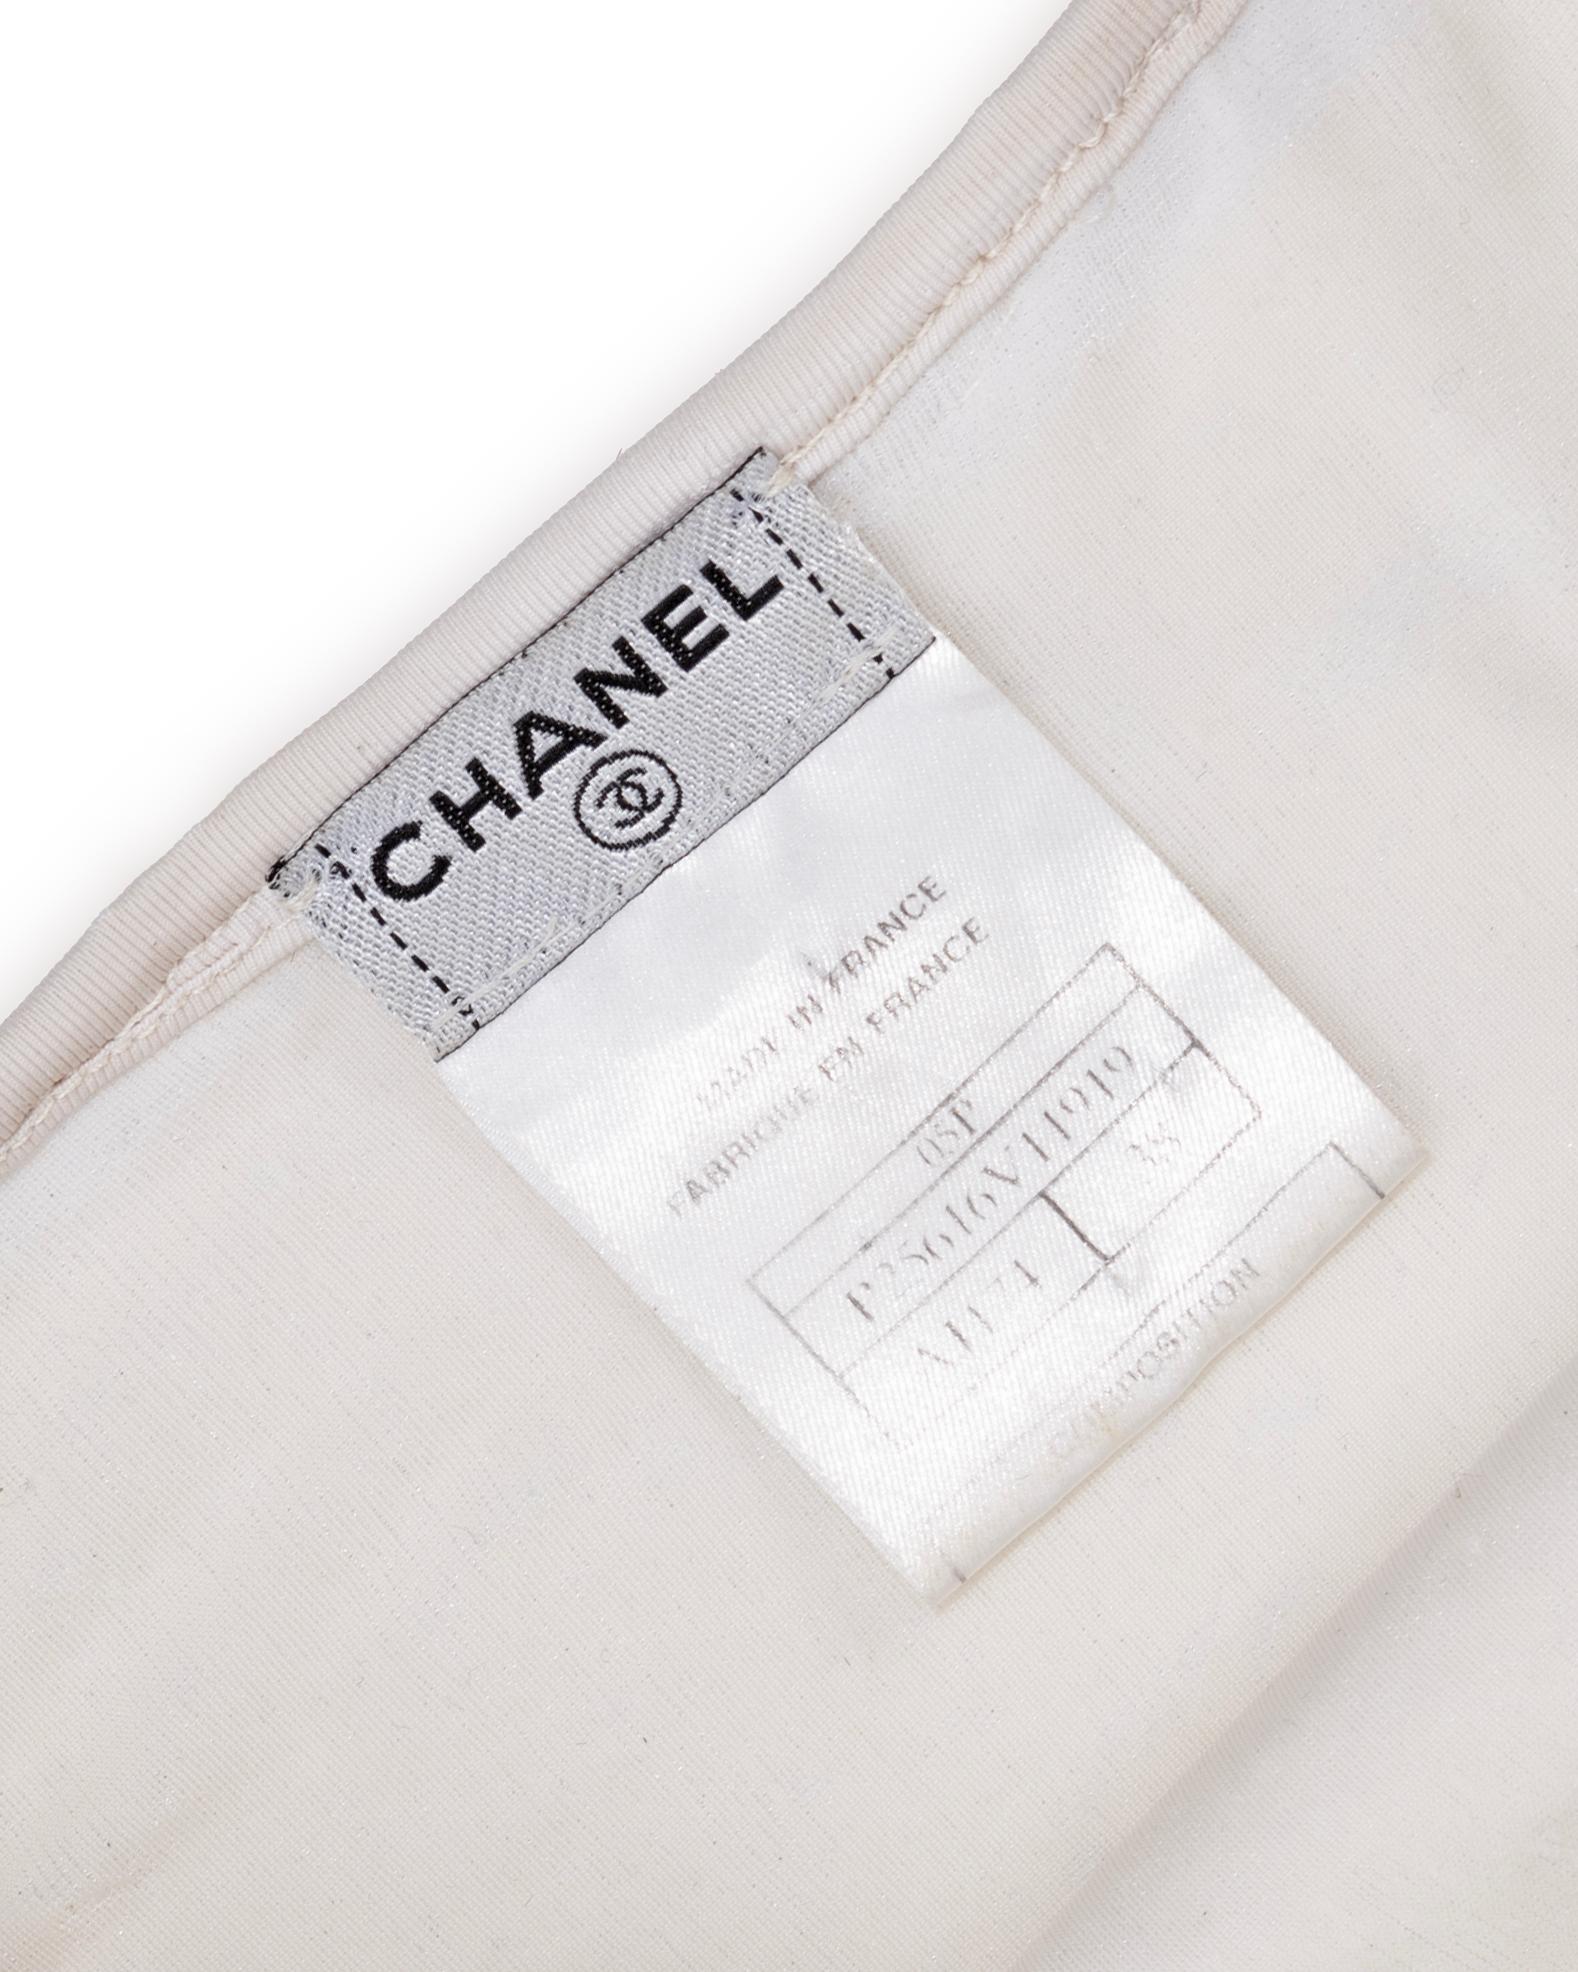 Chanel by Karl Lagerfeld White Iridescent Sequin Mini Dress, ss 2005 For Sale 6